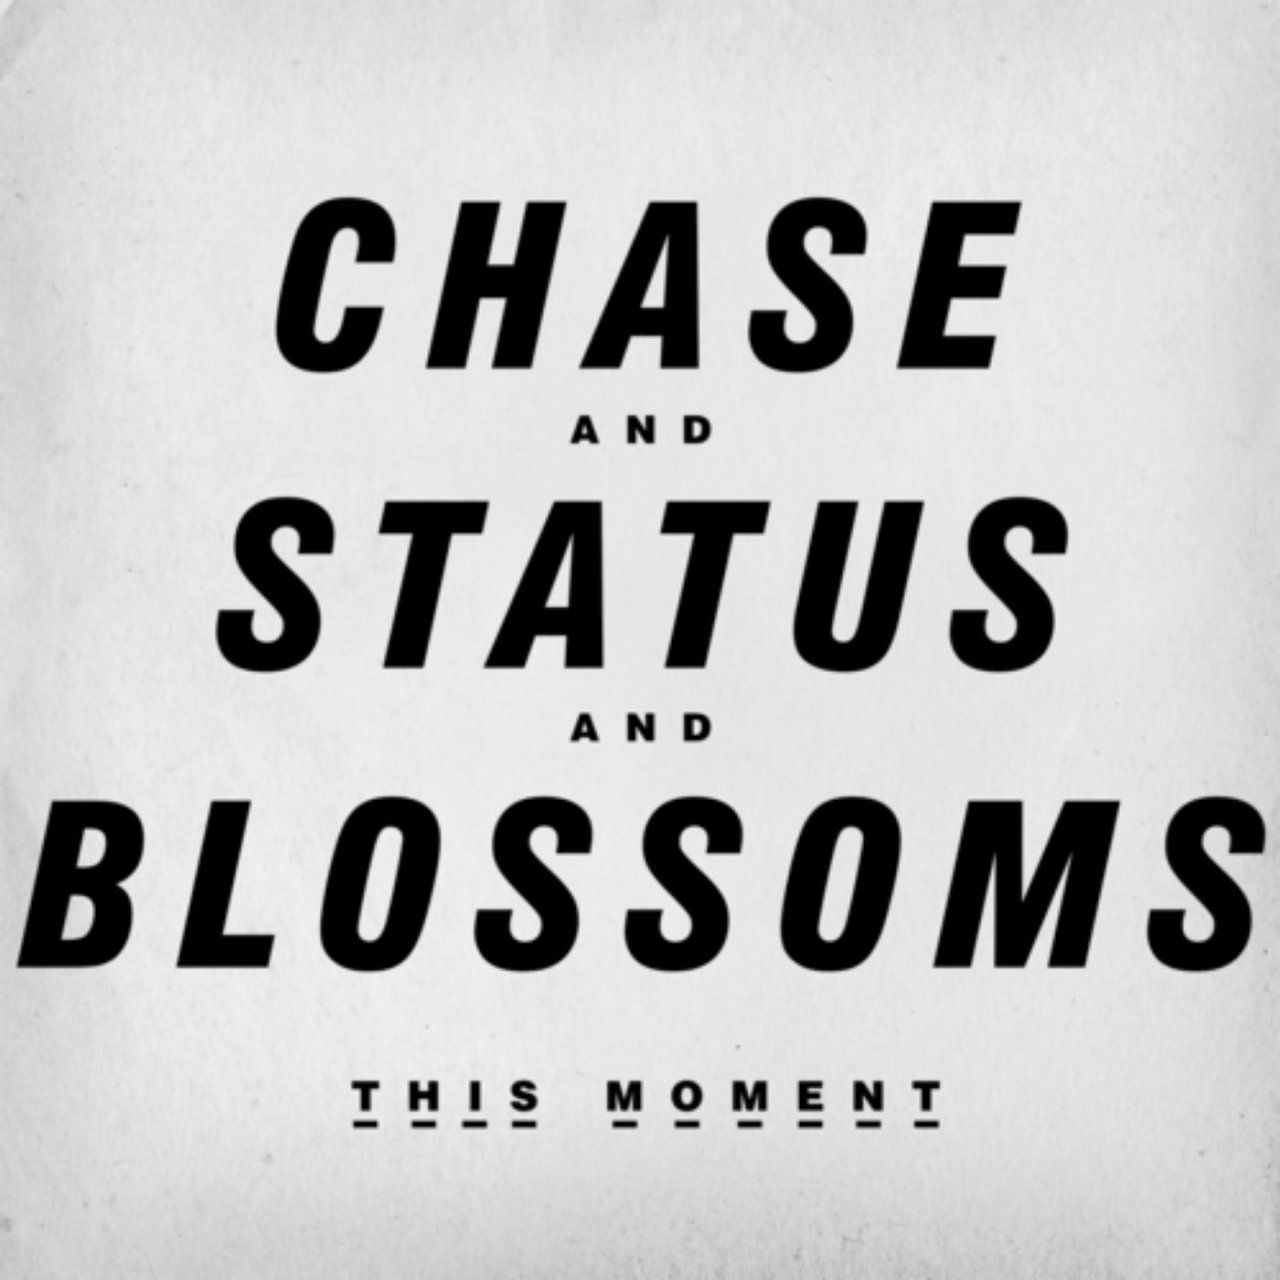 chase-status-blossoms-this-moment.jpg